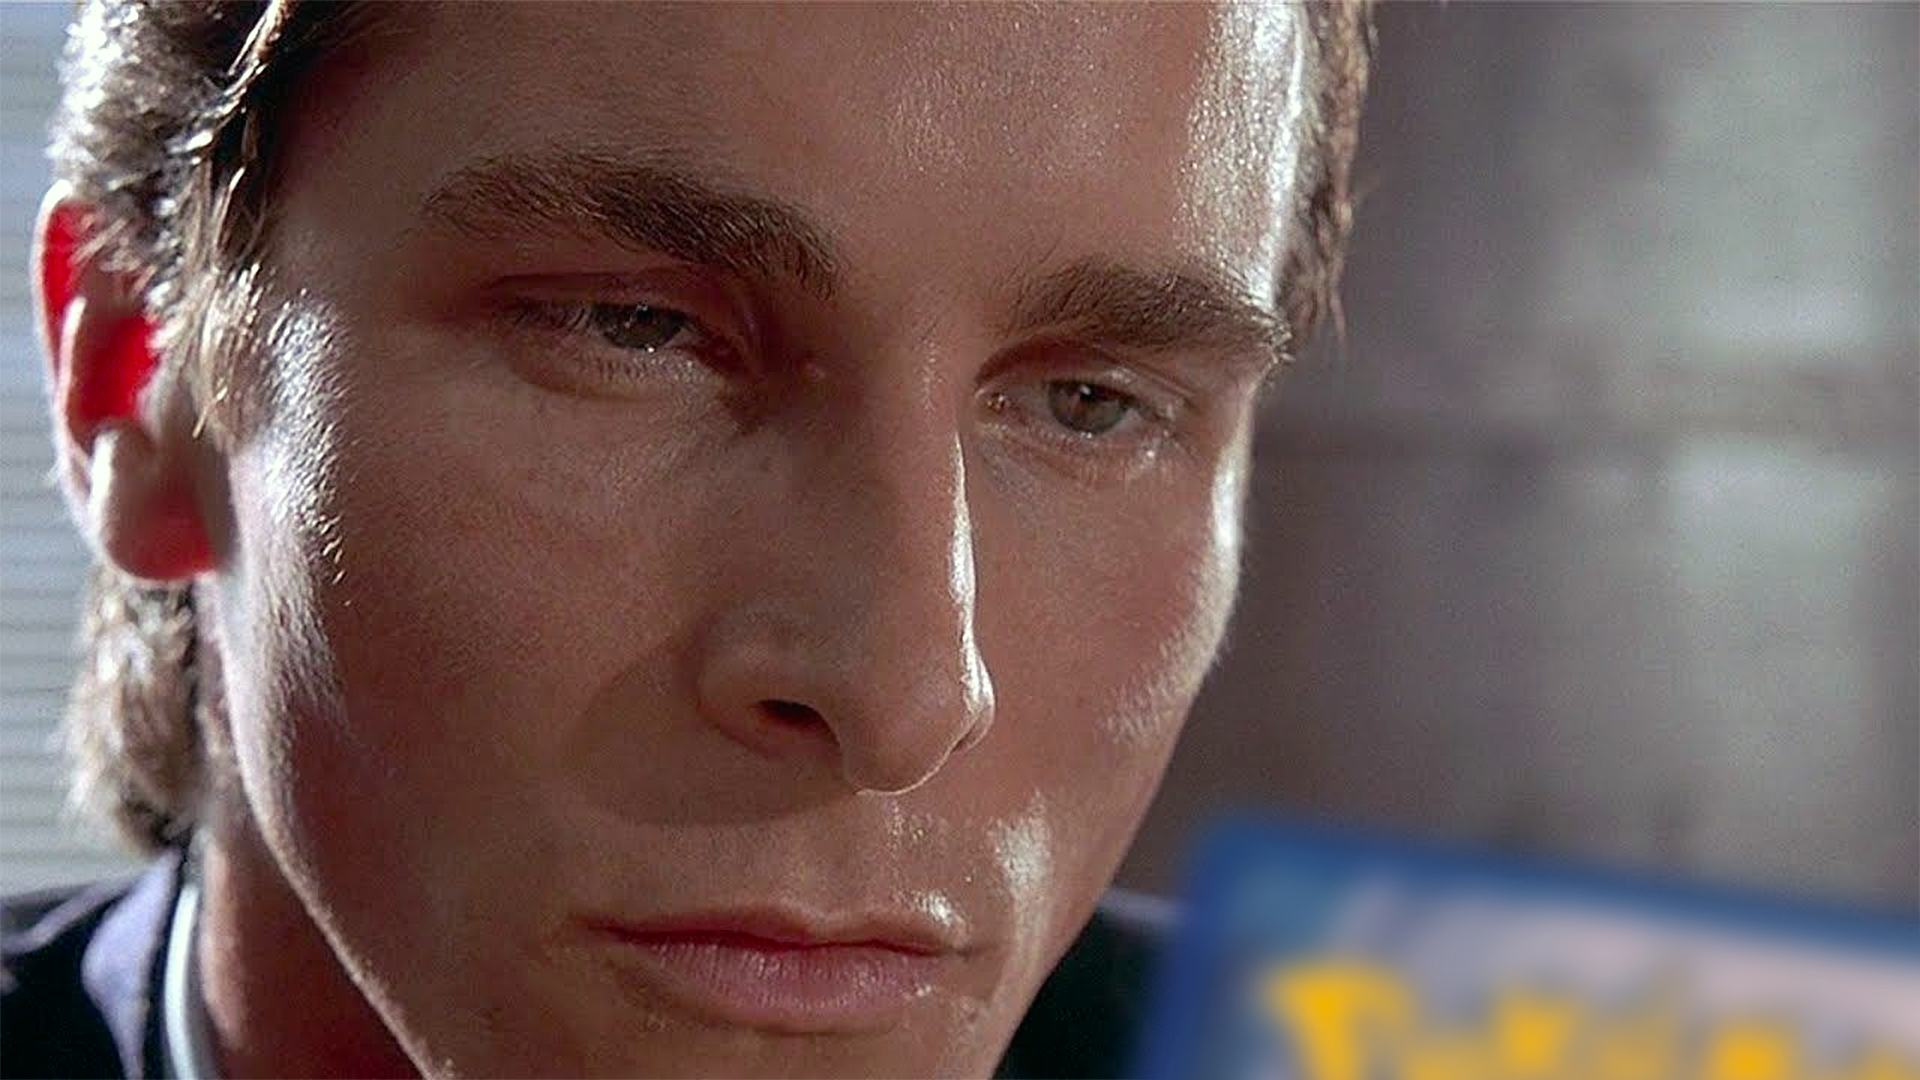 A still of Patrick Bateman contemplating a business card from the movie American Psycho, with a Pokémon card swapped in for Paul Allen’s business card